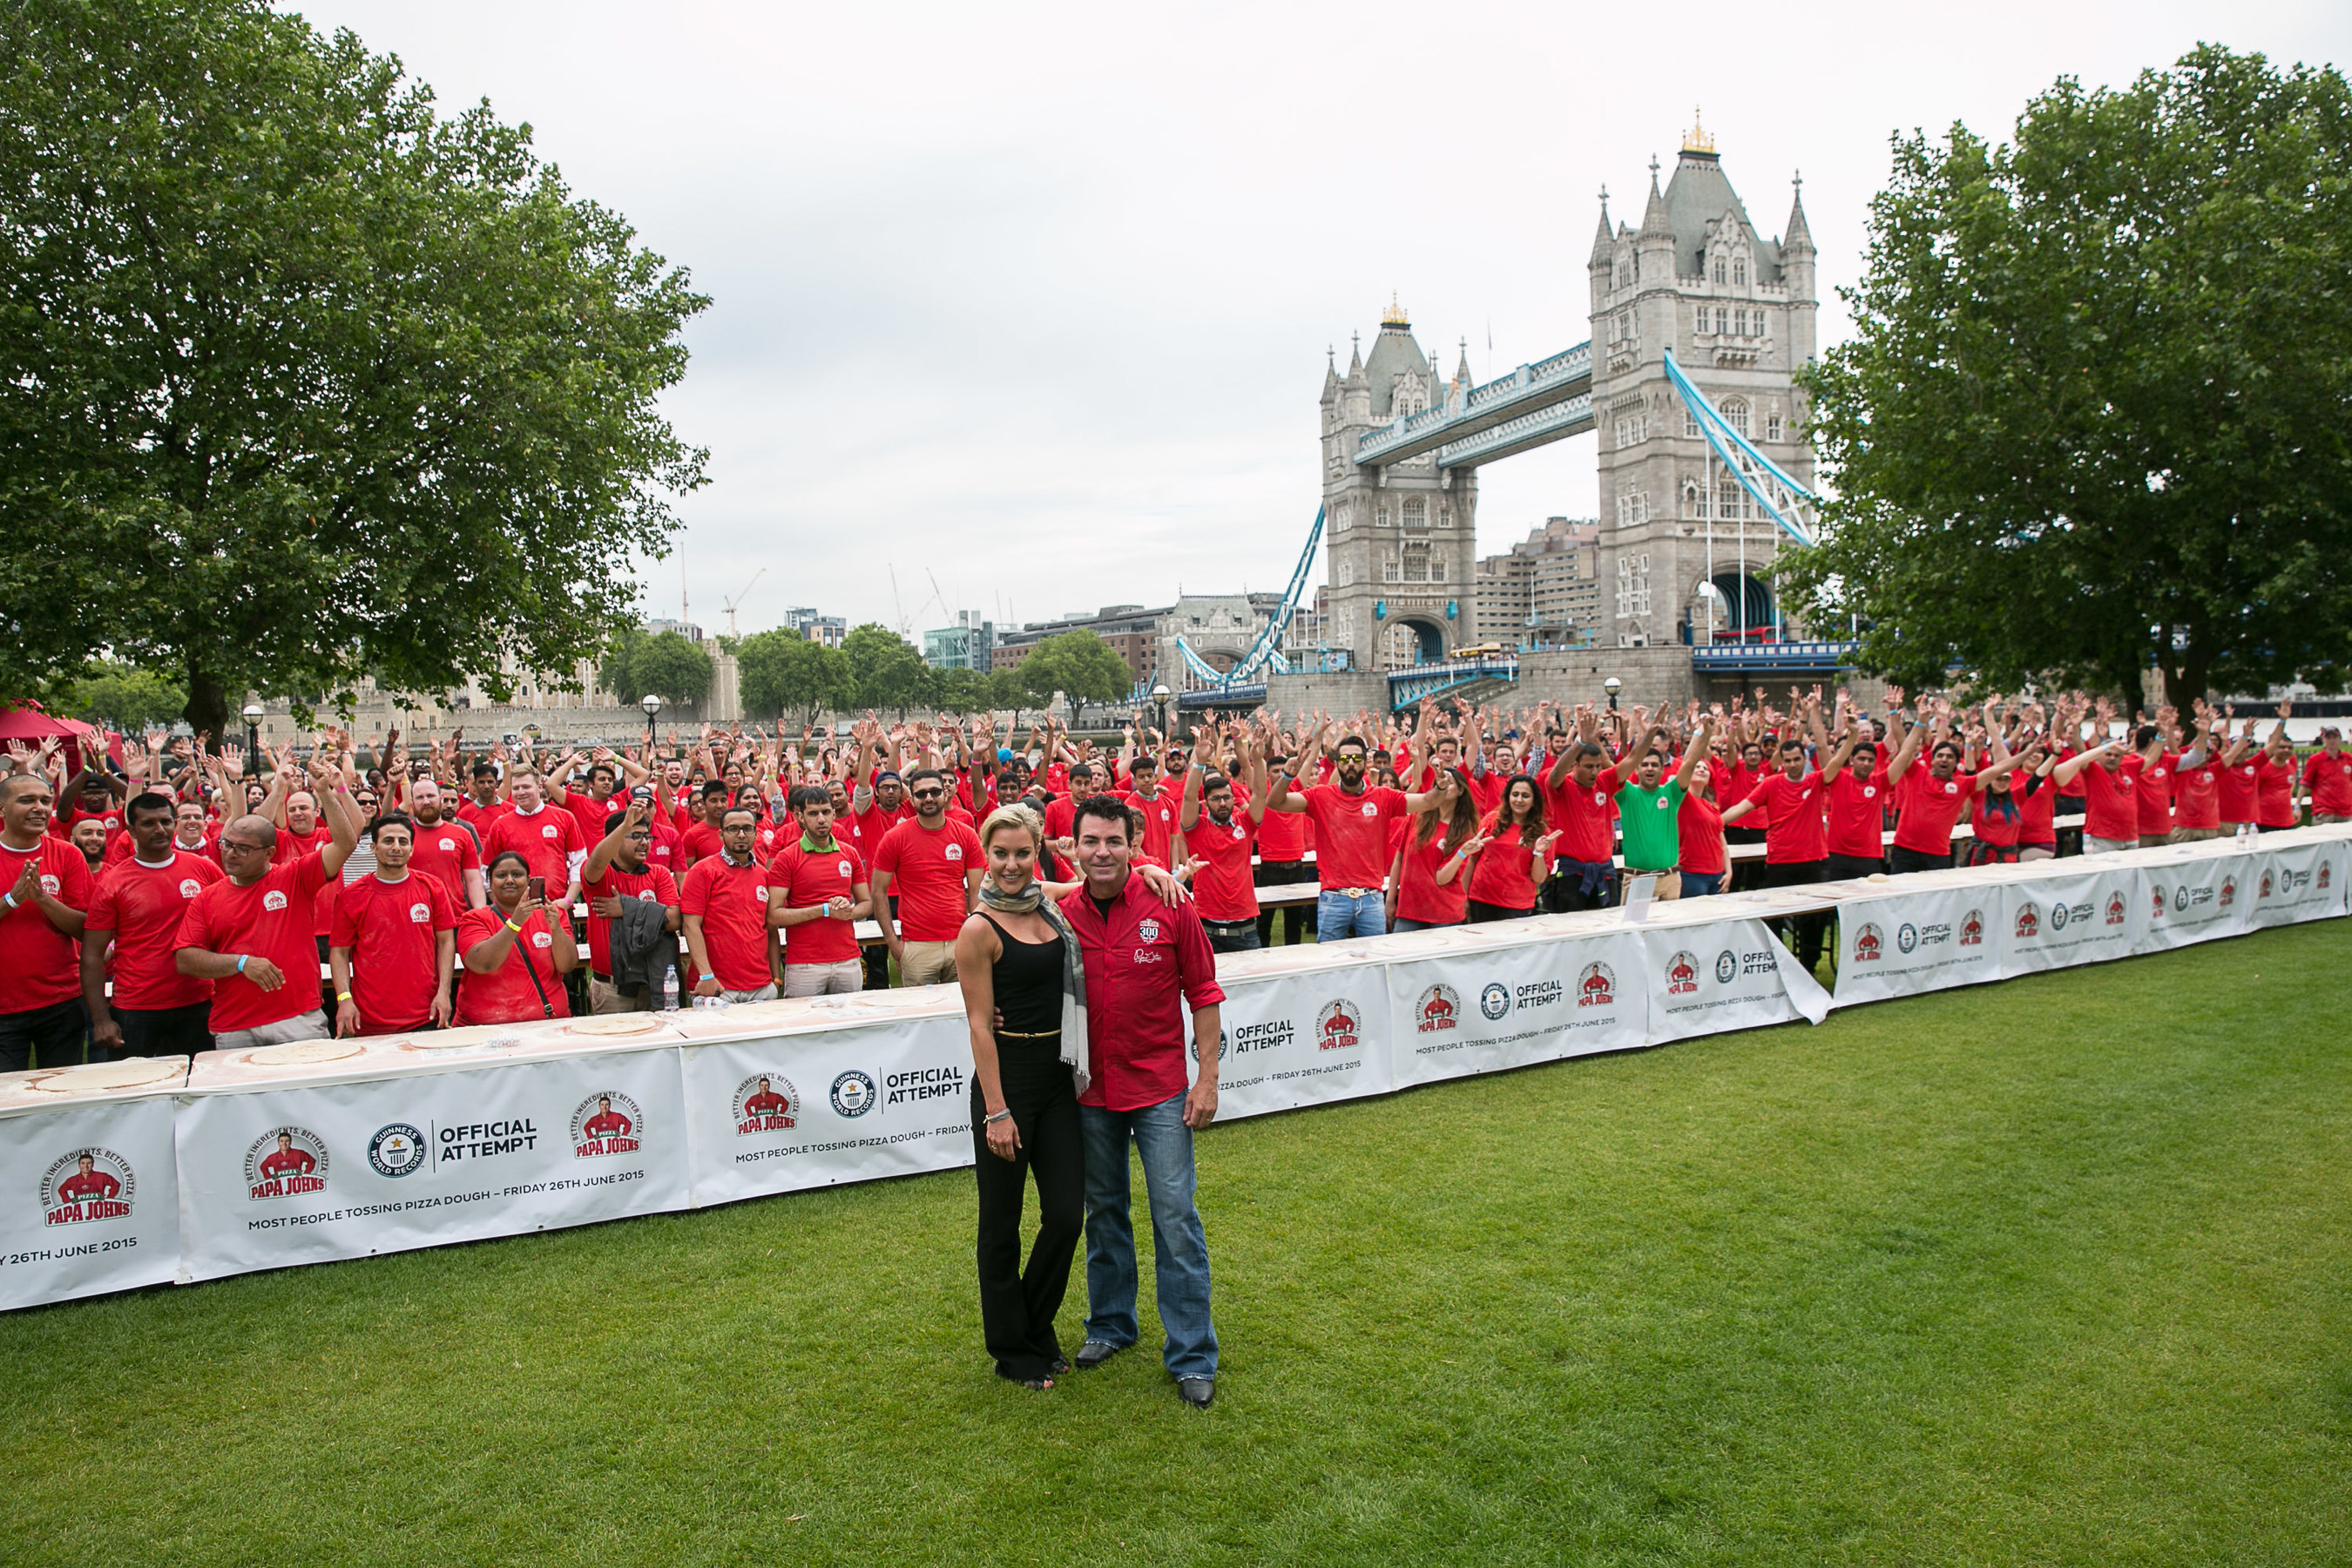 Papa John's Founder, John Schnatter, and Natalie Lowe, star of Strictly Come Dancing, pose for a photo after breaking a GUINNESS WORLD RECORD with 338 people tossing pizza at once. (PRNewsFoto/Papa John's) (PRNewsFoto/Papa John's)